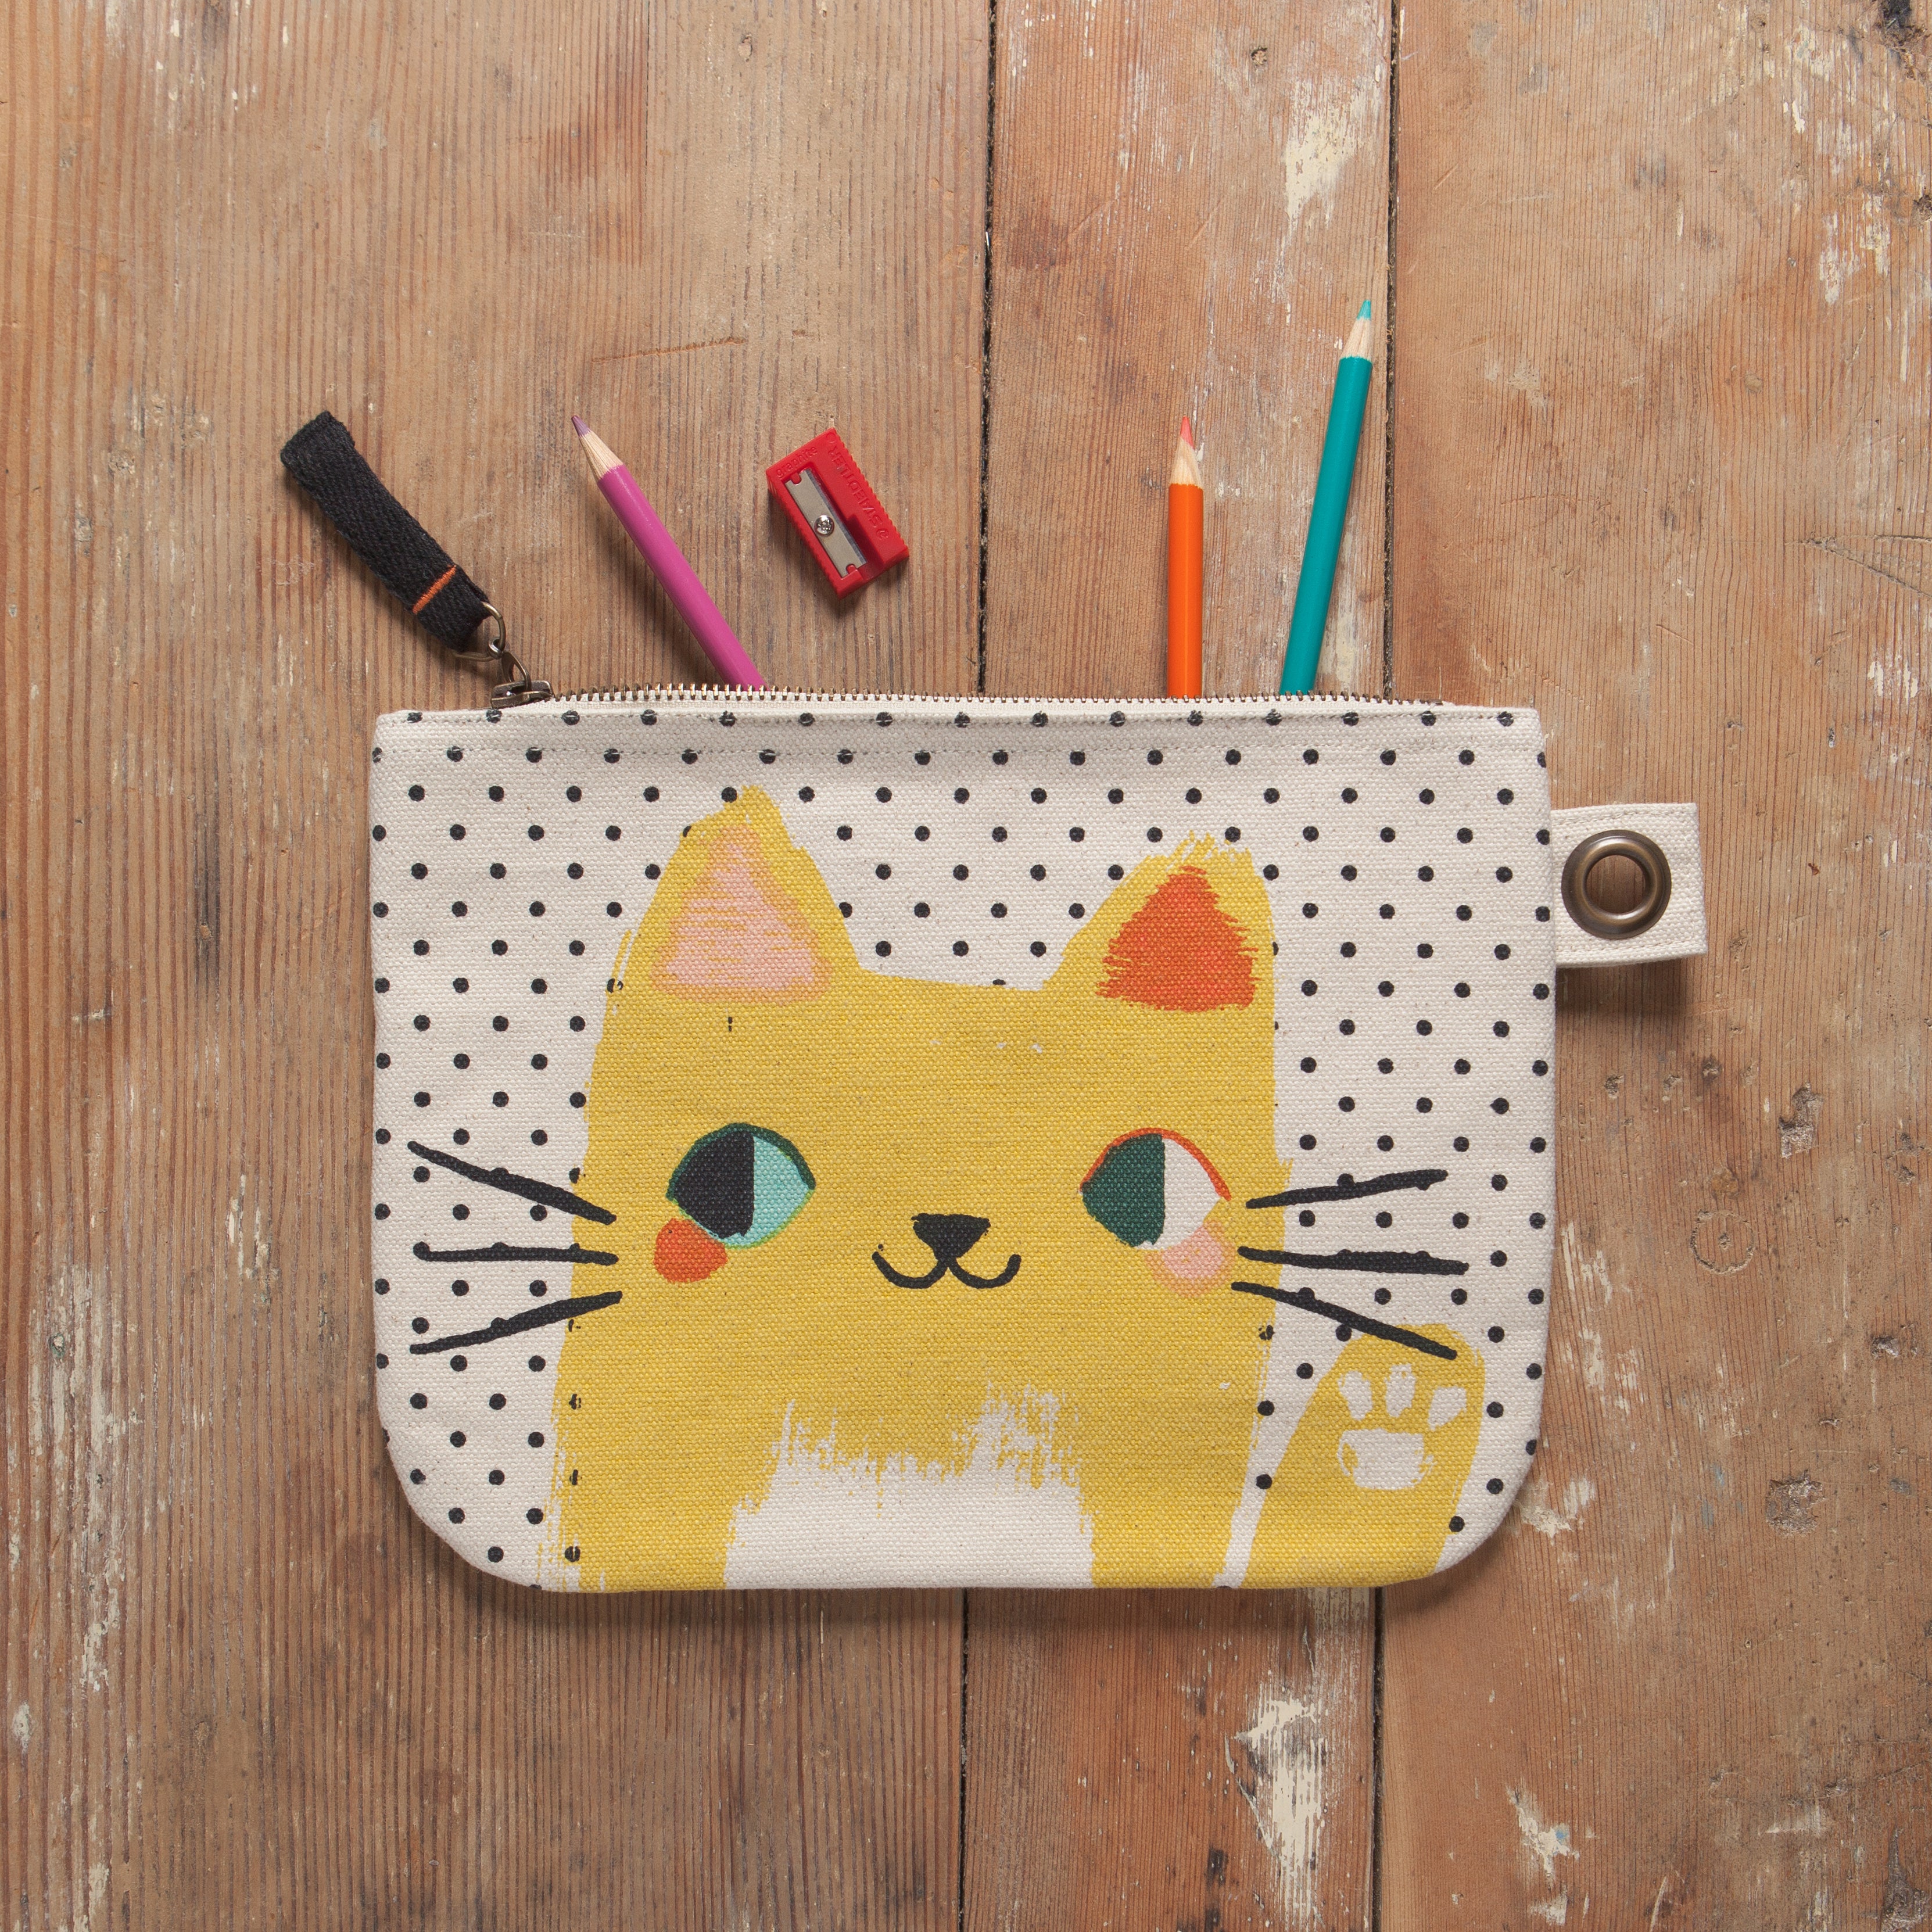 white zip up pouch with black polka dots and a yellow waving cat on a desk filled with utensils 